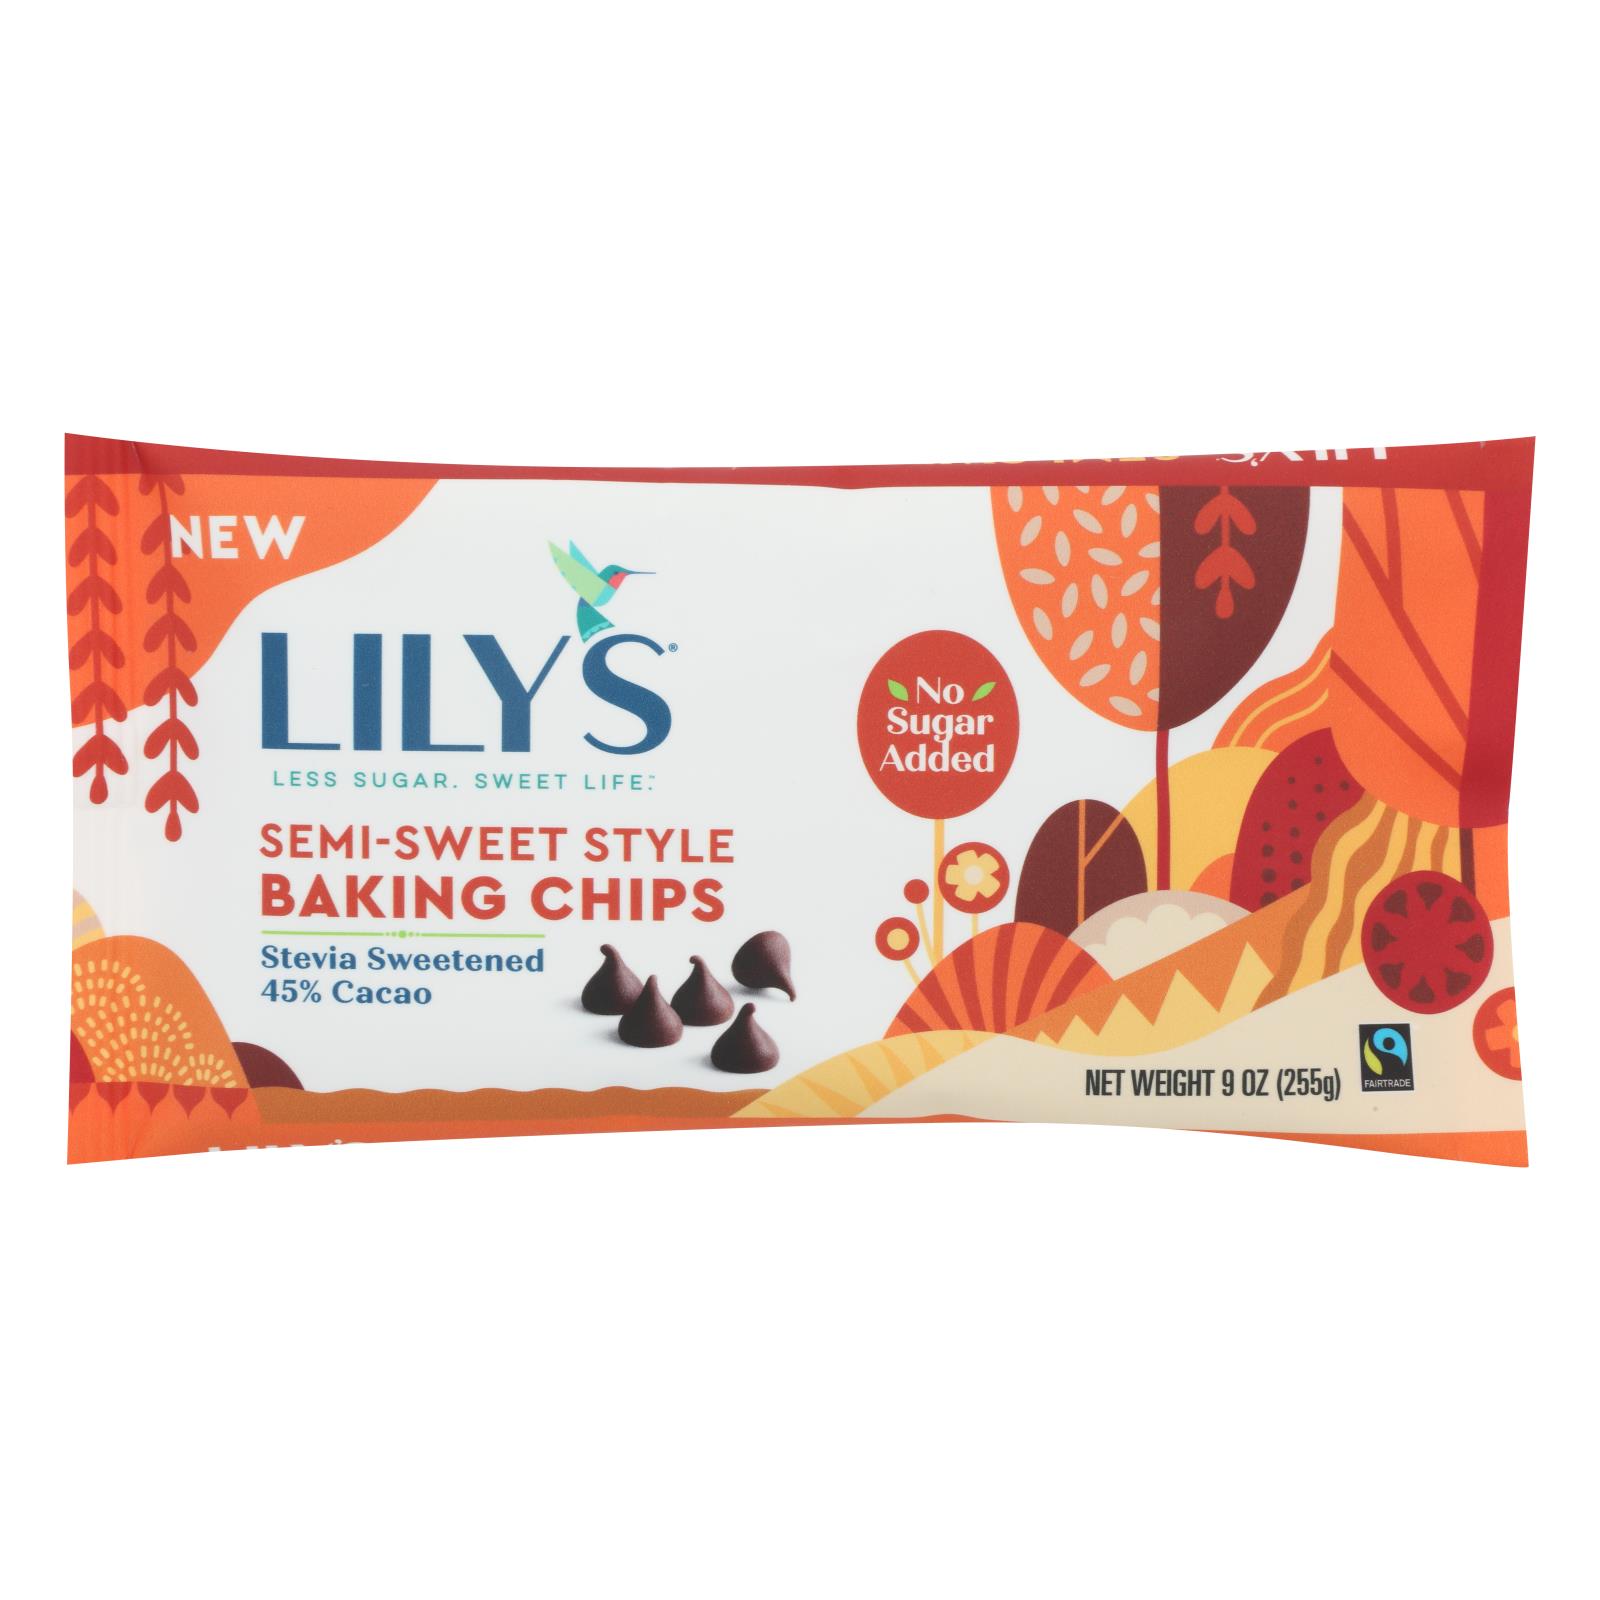 Lily's Sweets - Baking Chips Sem Sweet Styl - 12개 묶음상품 - 9 OZ